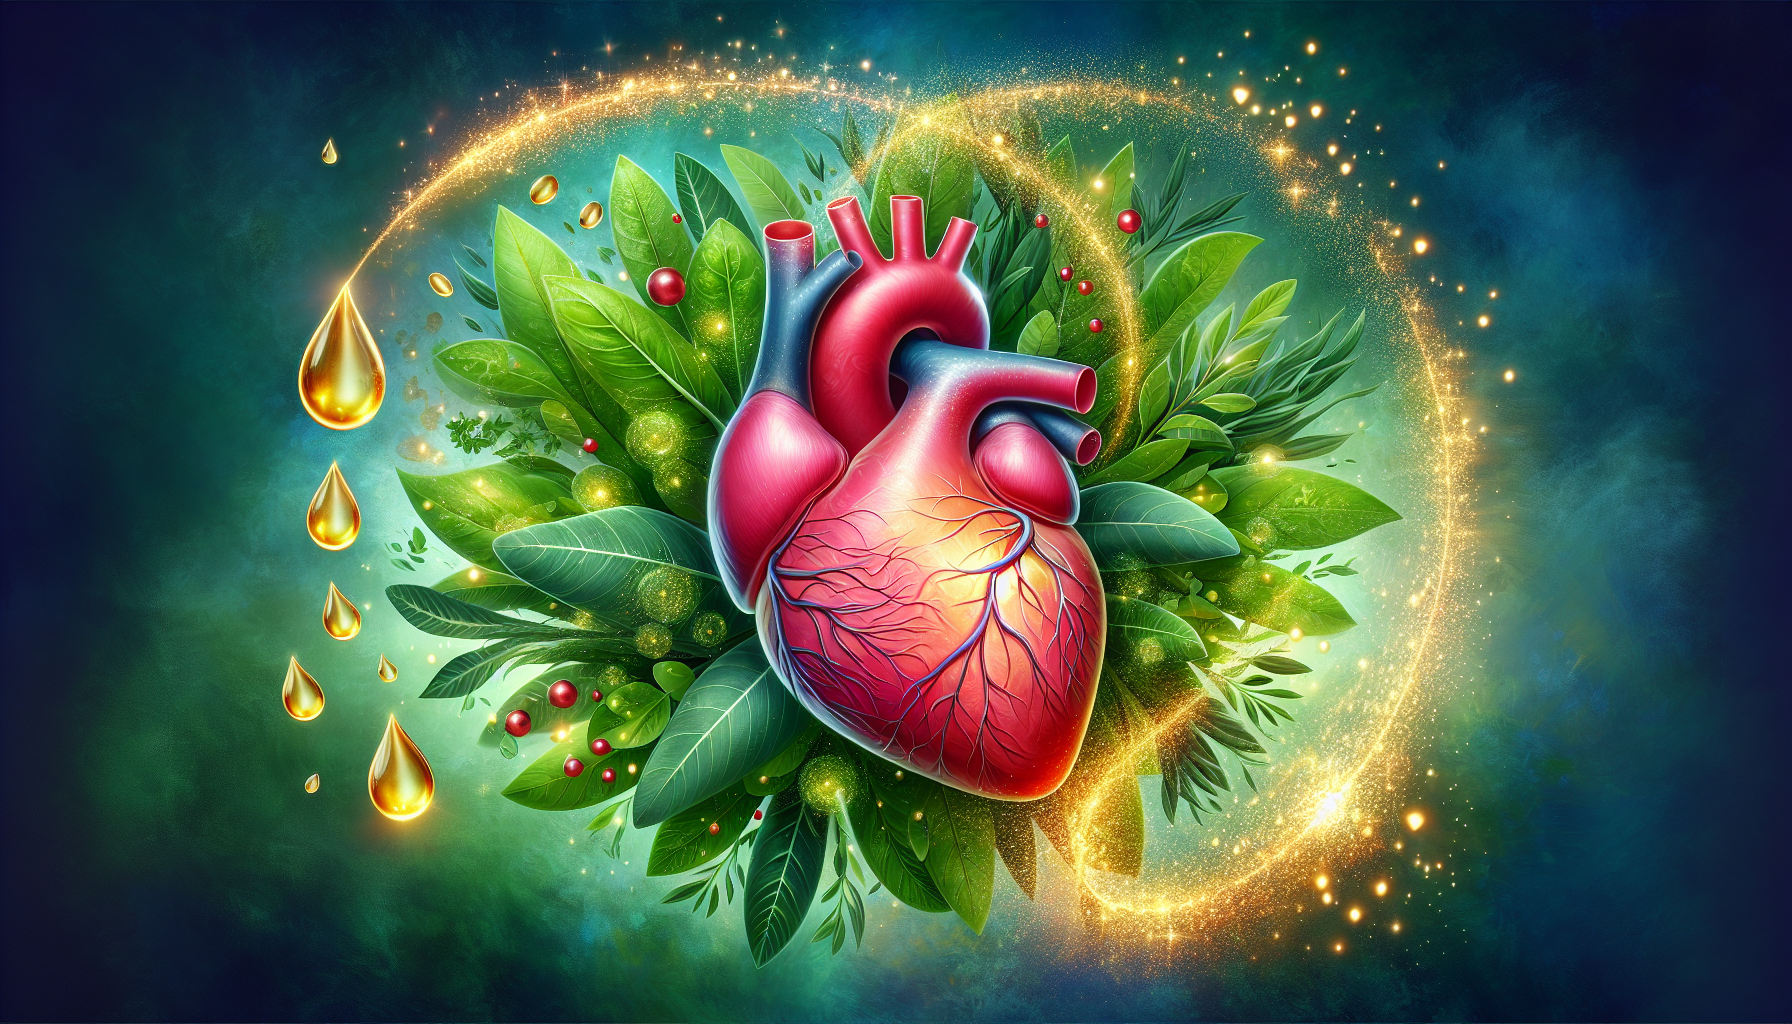 Illustration of a healthy heart surrounded by omega 3 fatty acids and plant compounds